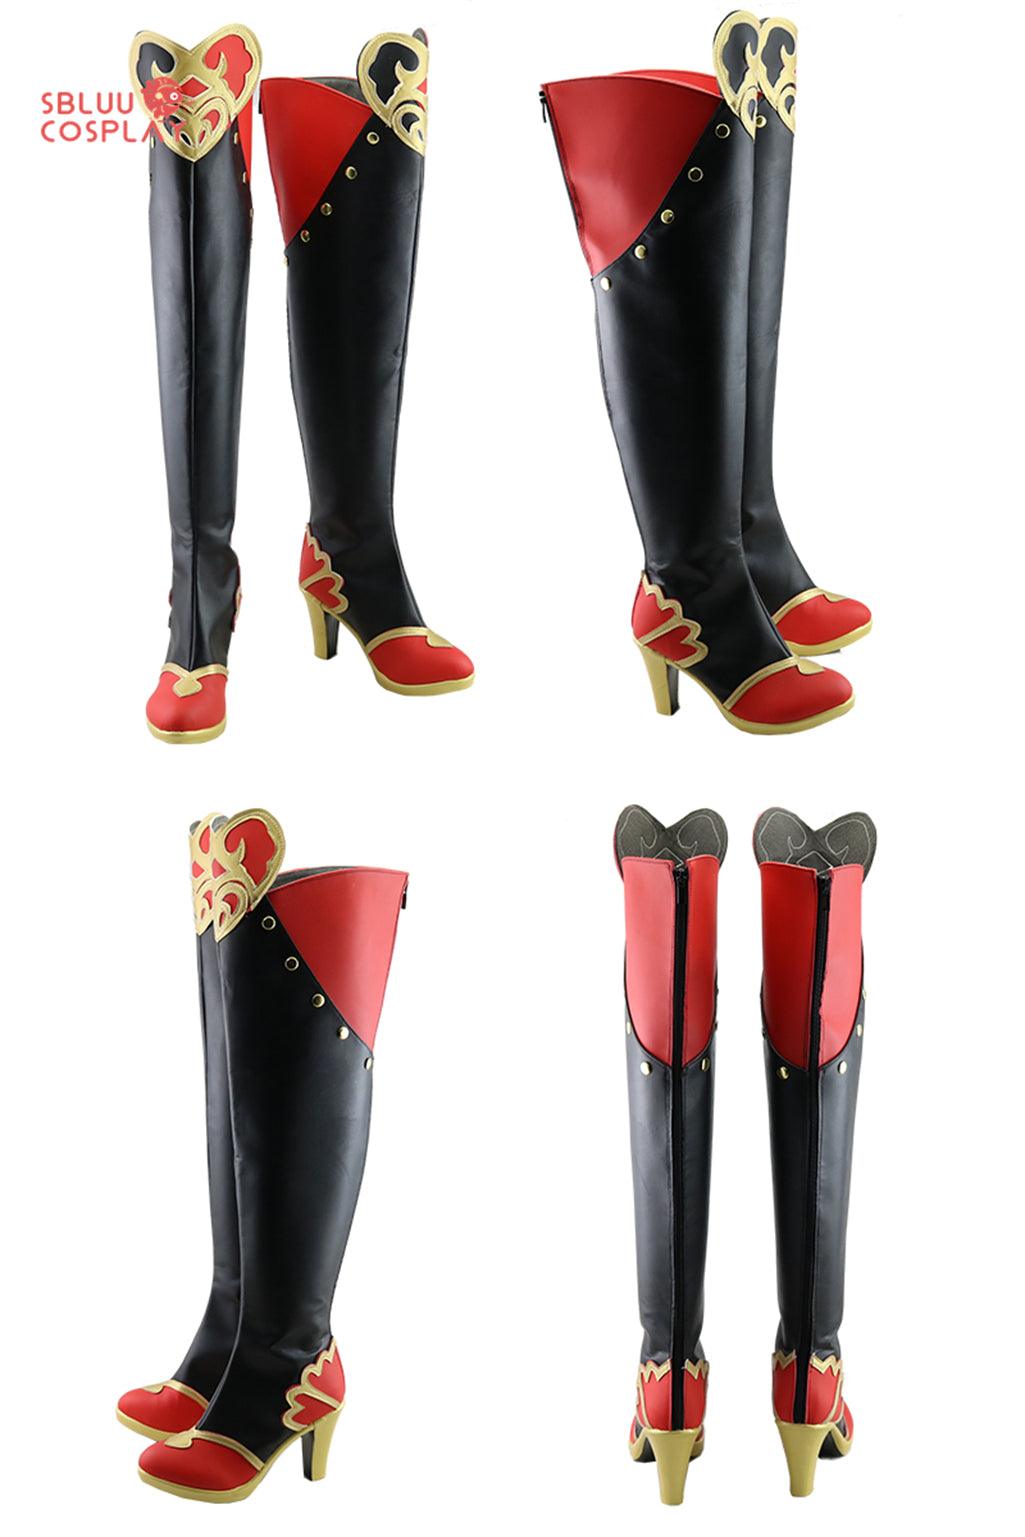 Twisted-Wonderland Riddle Rosehearts Cosplay Shoes Custom Made Boots - SBluuCosplay